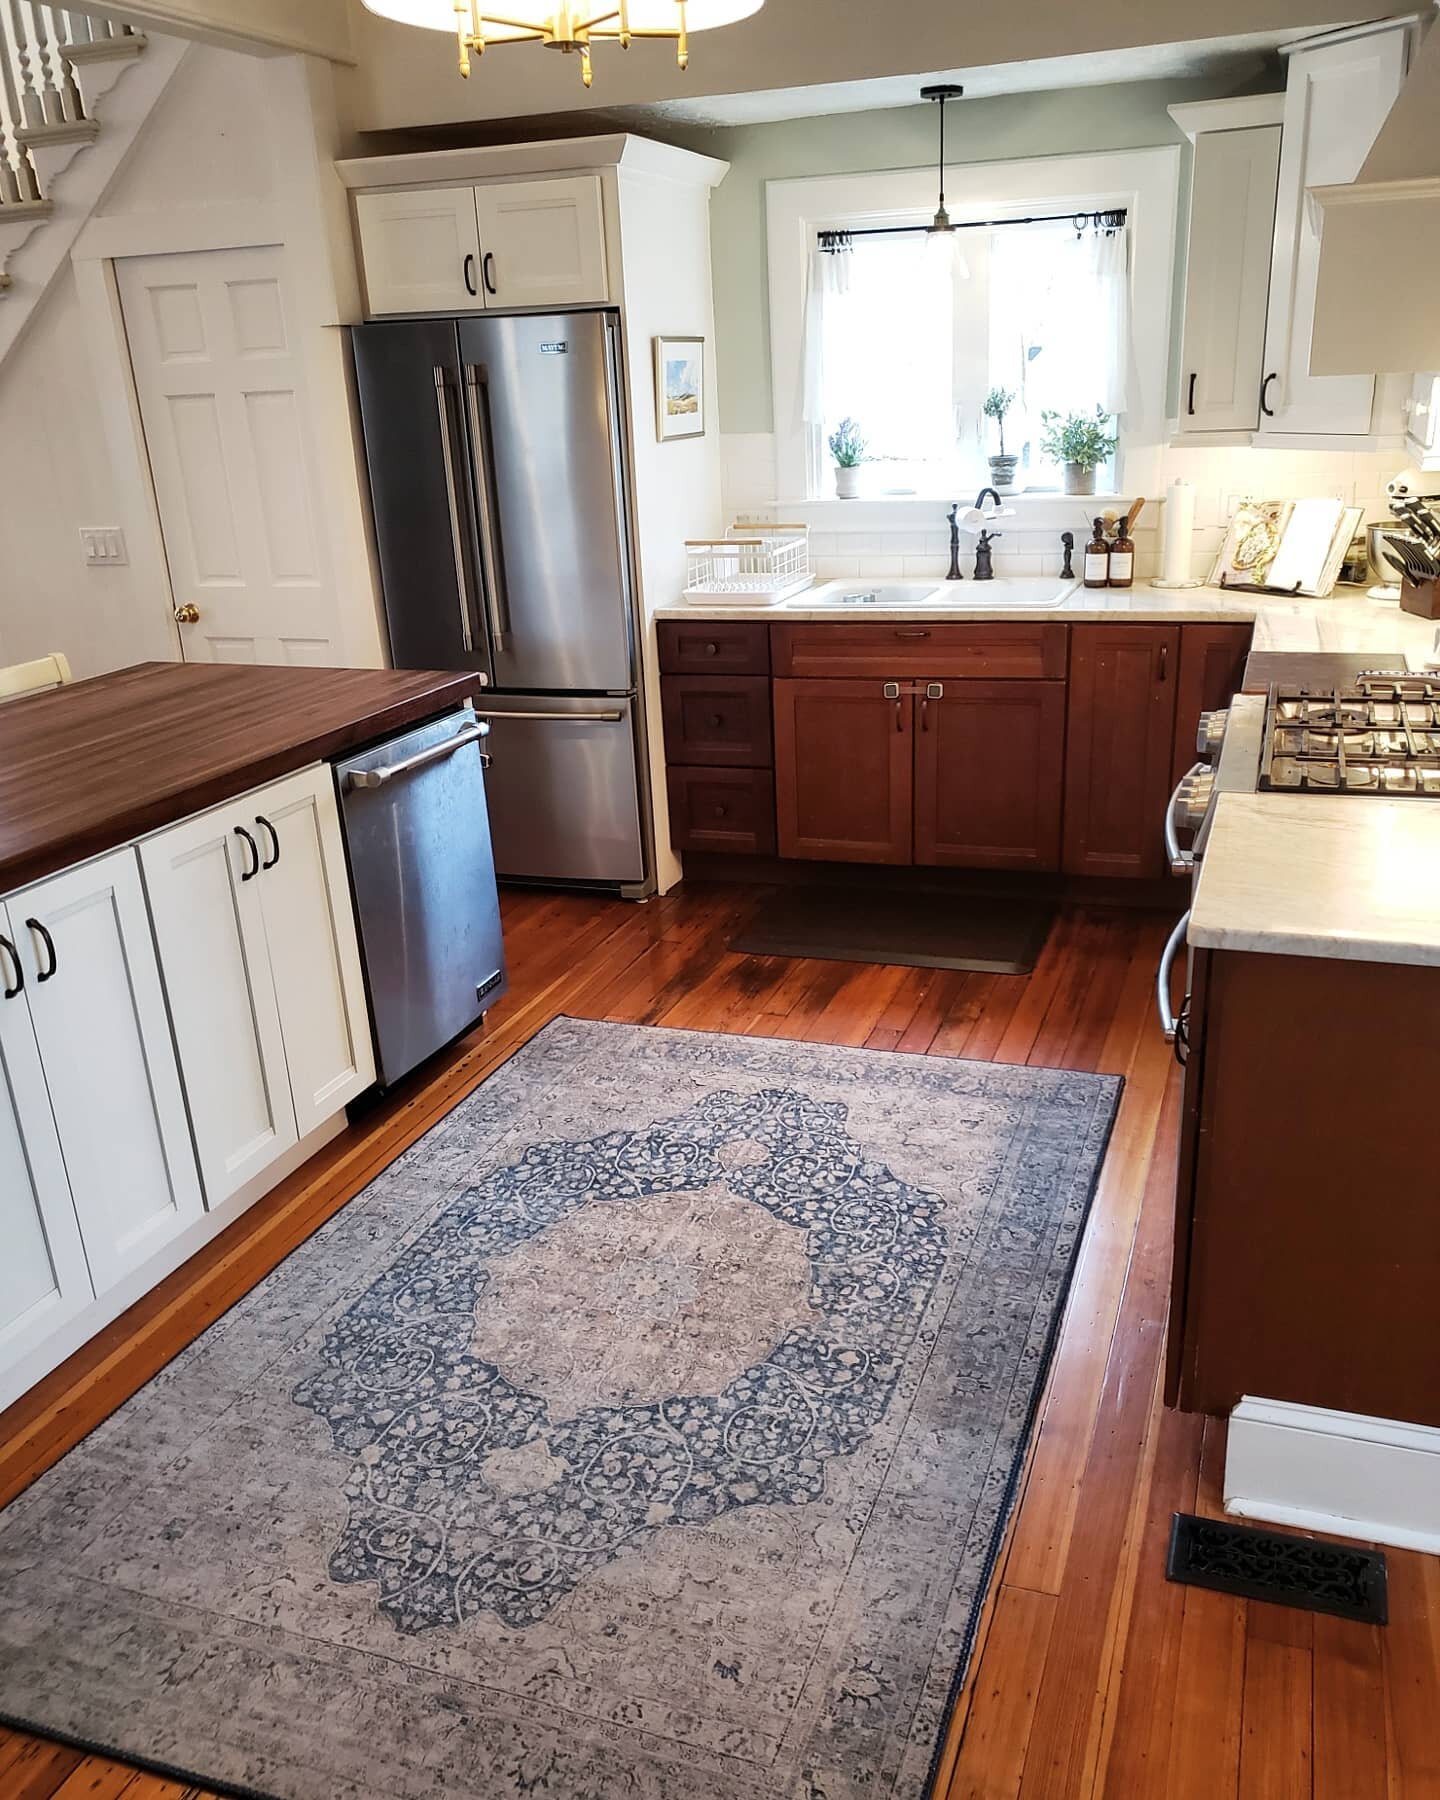 Kitchen Remodel! 🔨 We couldn't believe our eyes when we pulled up the ugly tile (check out the before pic) and found original wood flooring underneath. Even when they're imperfect, old floors have such character and charm, so we say expose 'em. We a